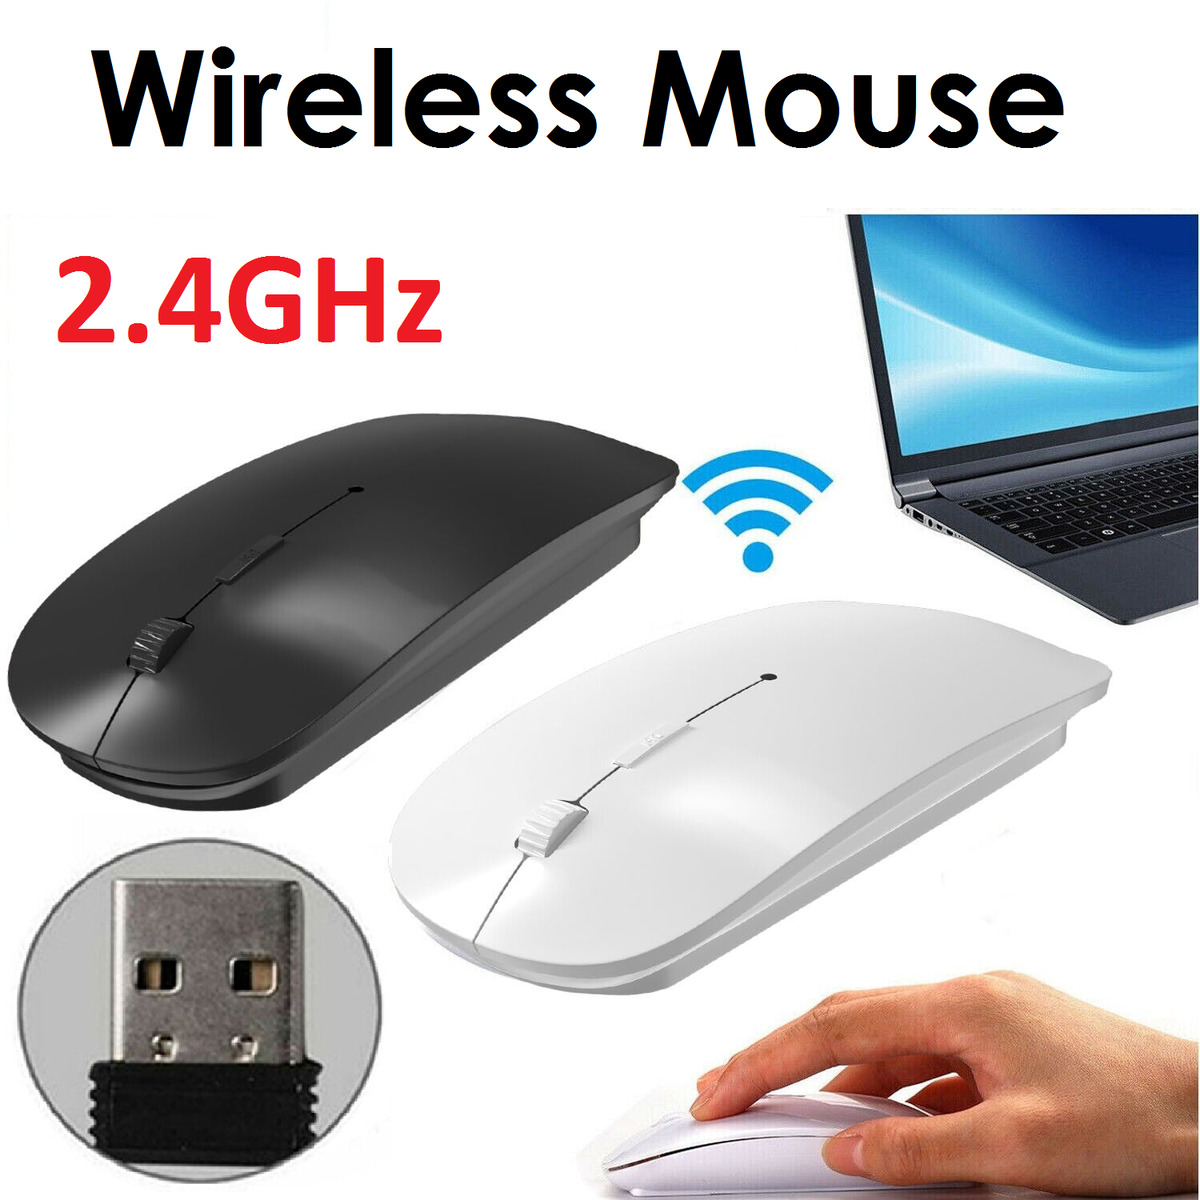 2.4GHz USB Wireless Mouse Optical Mice Slim for all laptop and desktop support